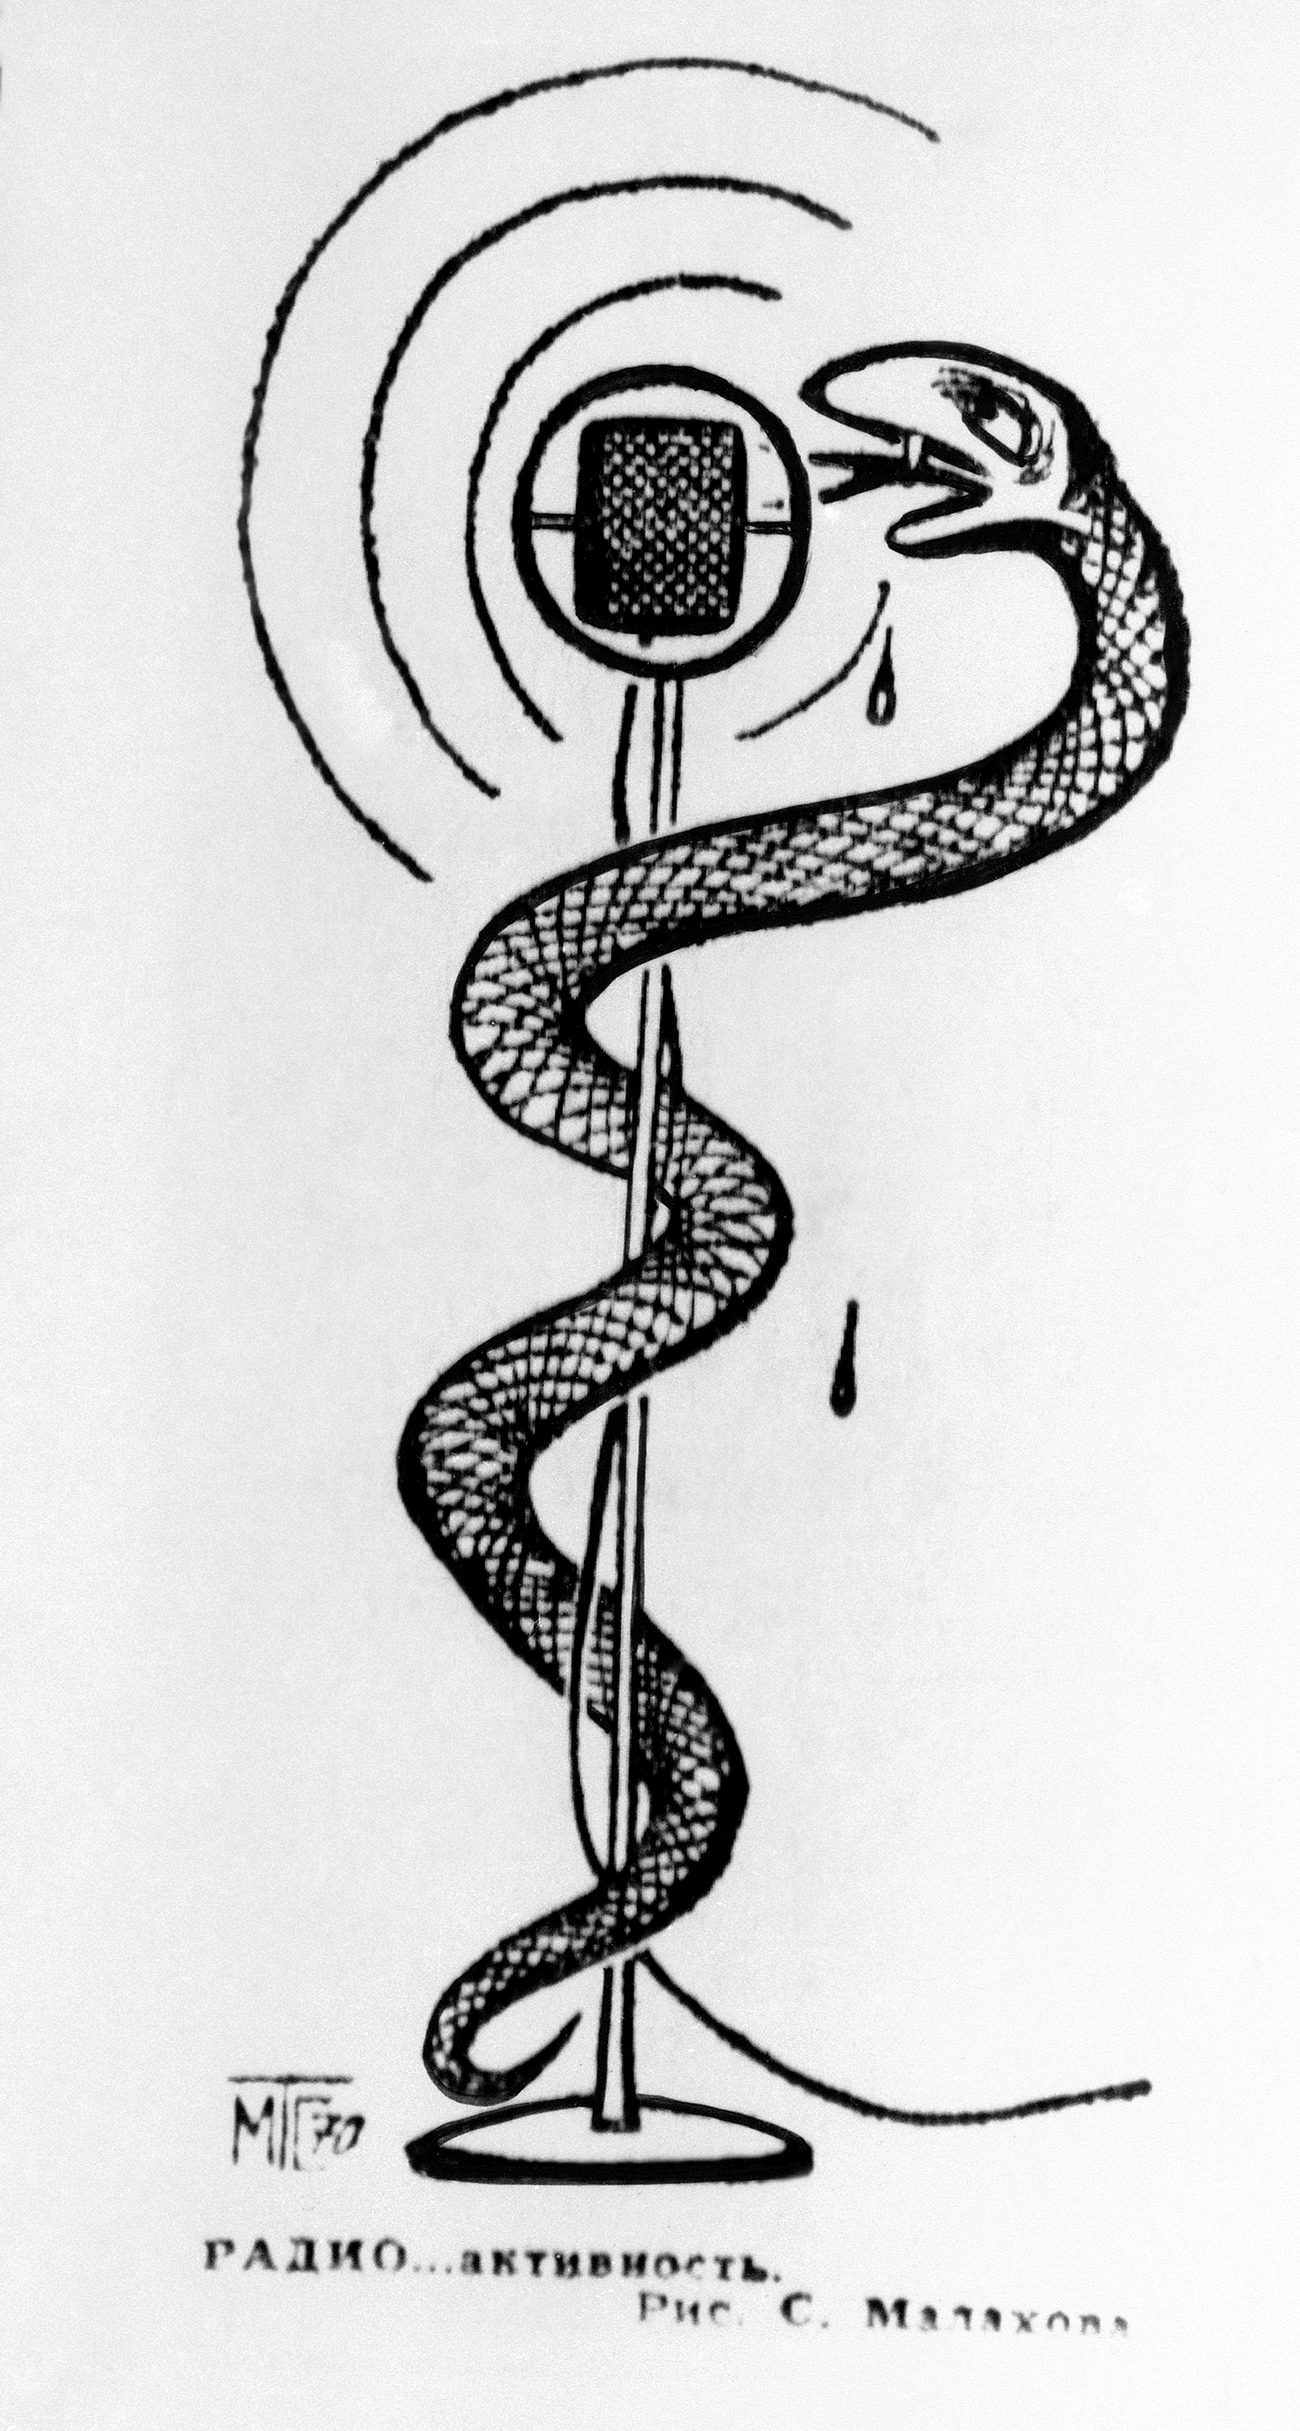 This cartoon titled “Radio-Activity” appeared in the newspaper Soviet Estonia on Jan. 24, 1970 as part of the Soviet press campaign against the daily broadcasts of the voice of America. Source: AP